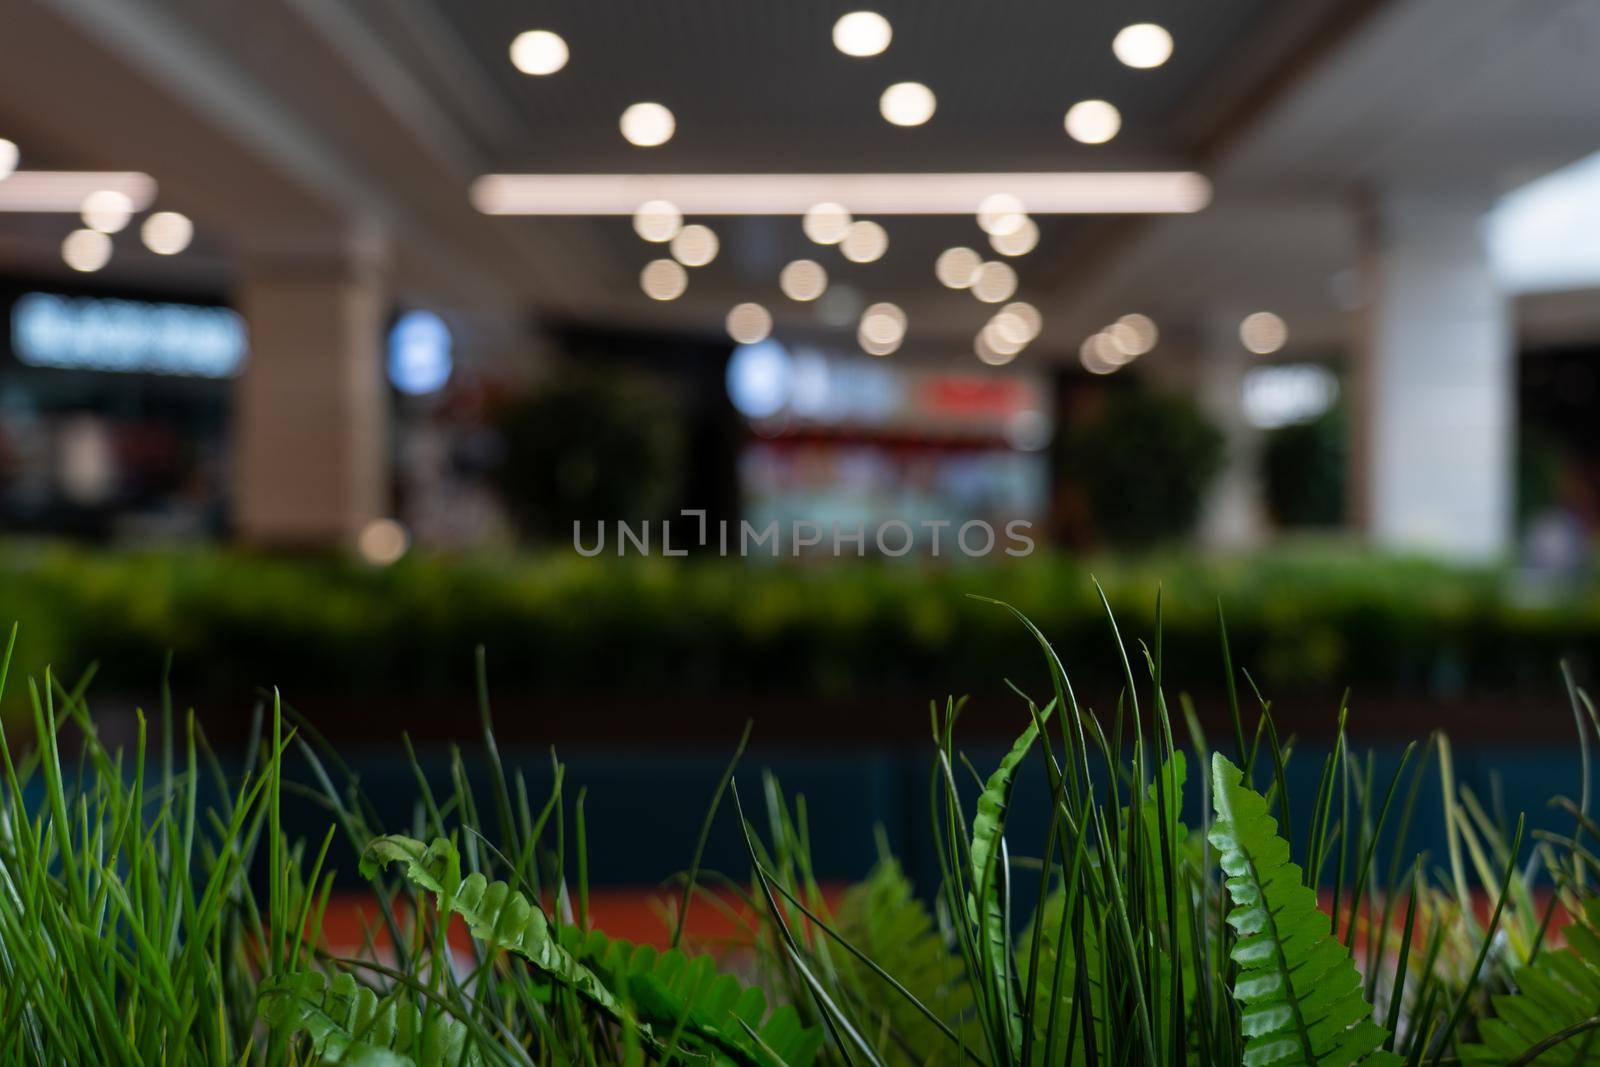 Food court area with spacious eating dining location decorated with grass. Modern design